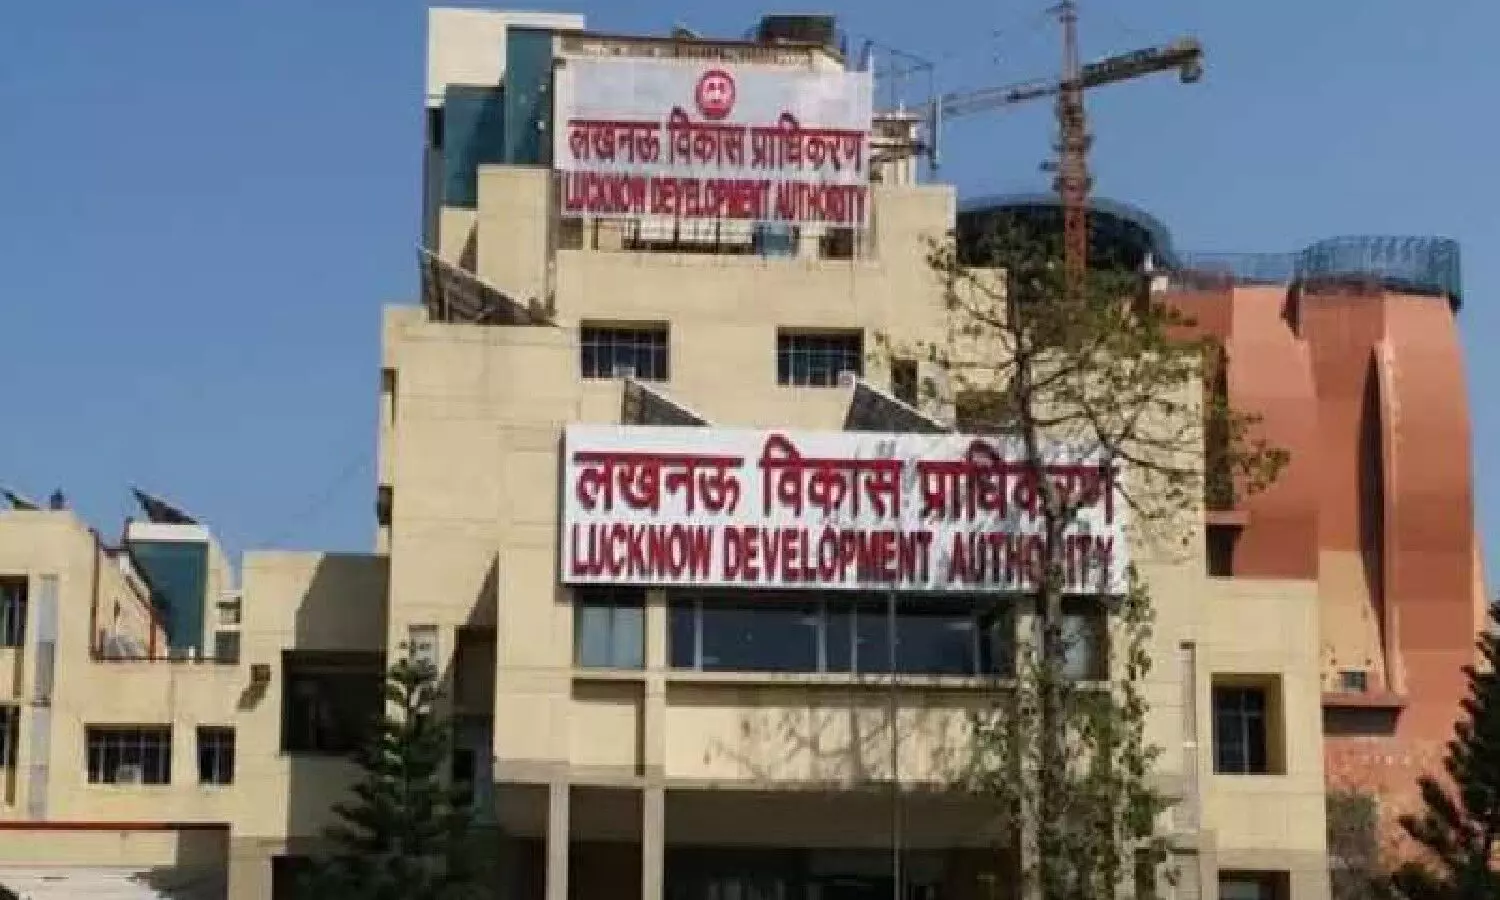 Lucknow Development Authority (LDA) is now facing the UP RERA Tribunal